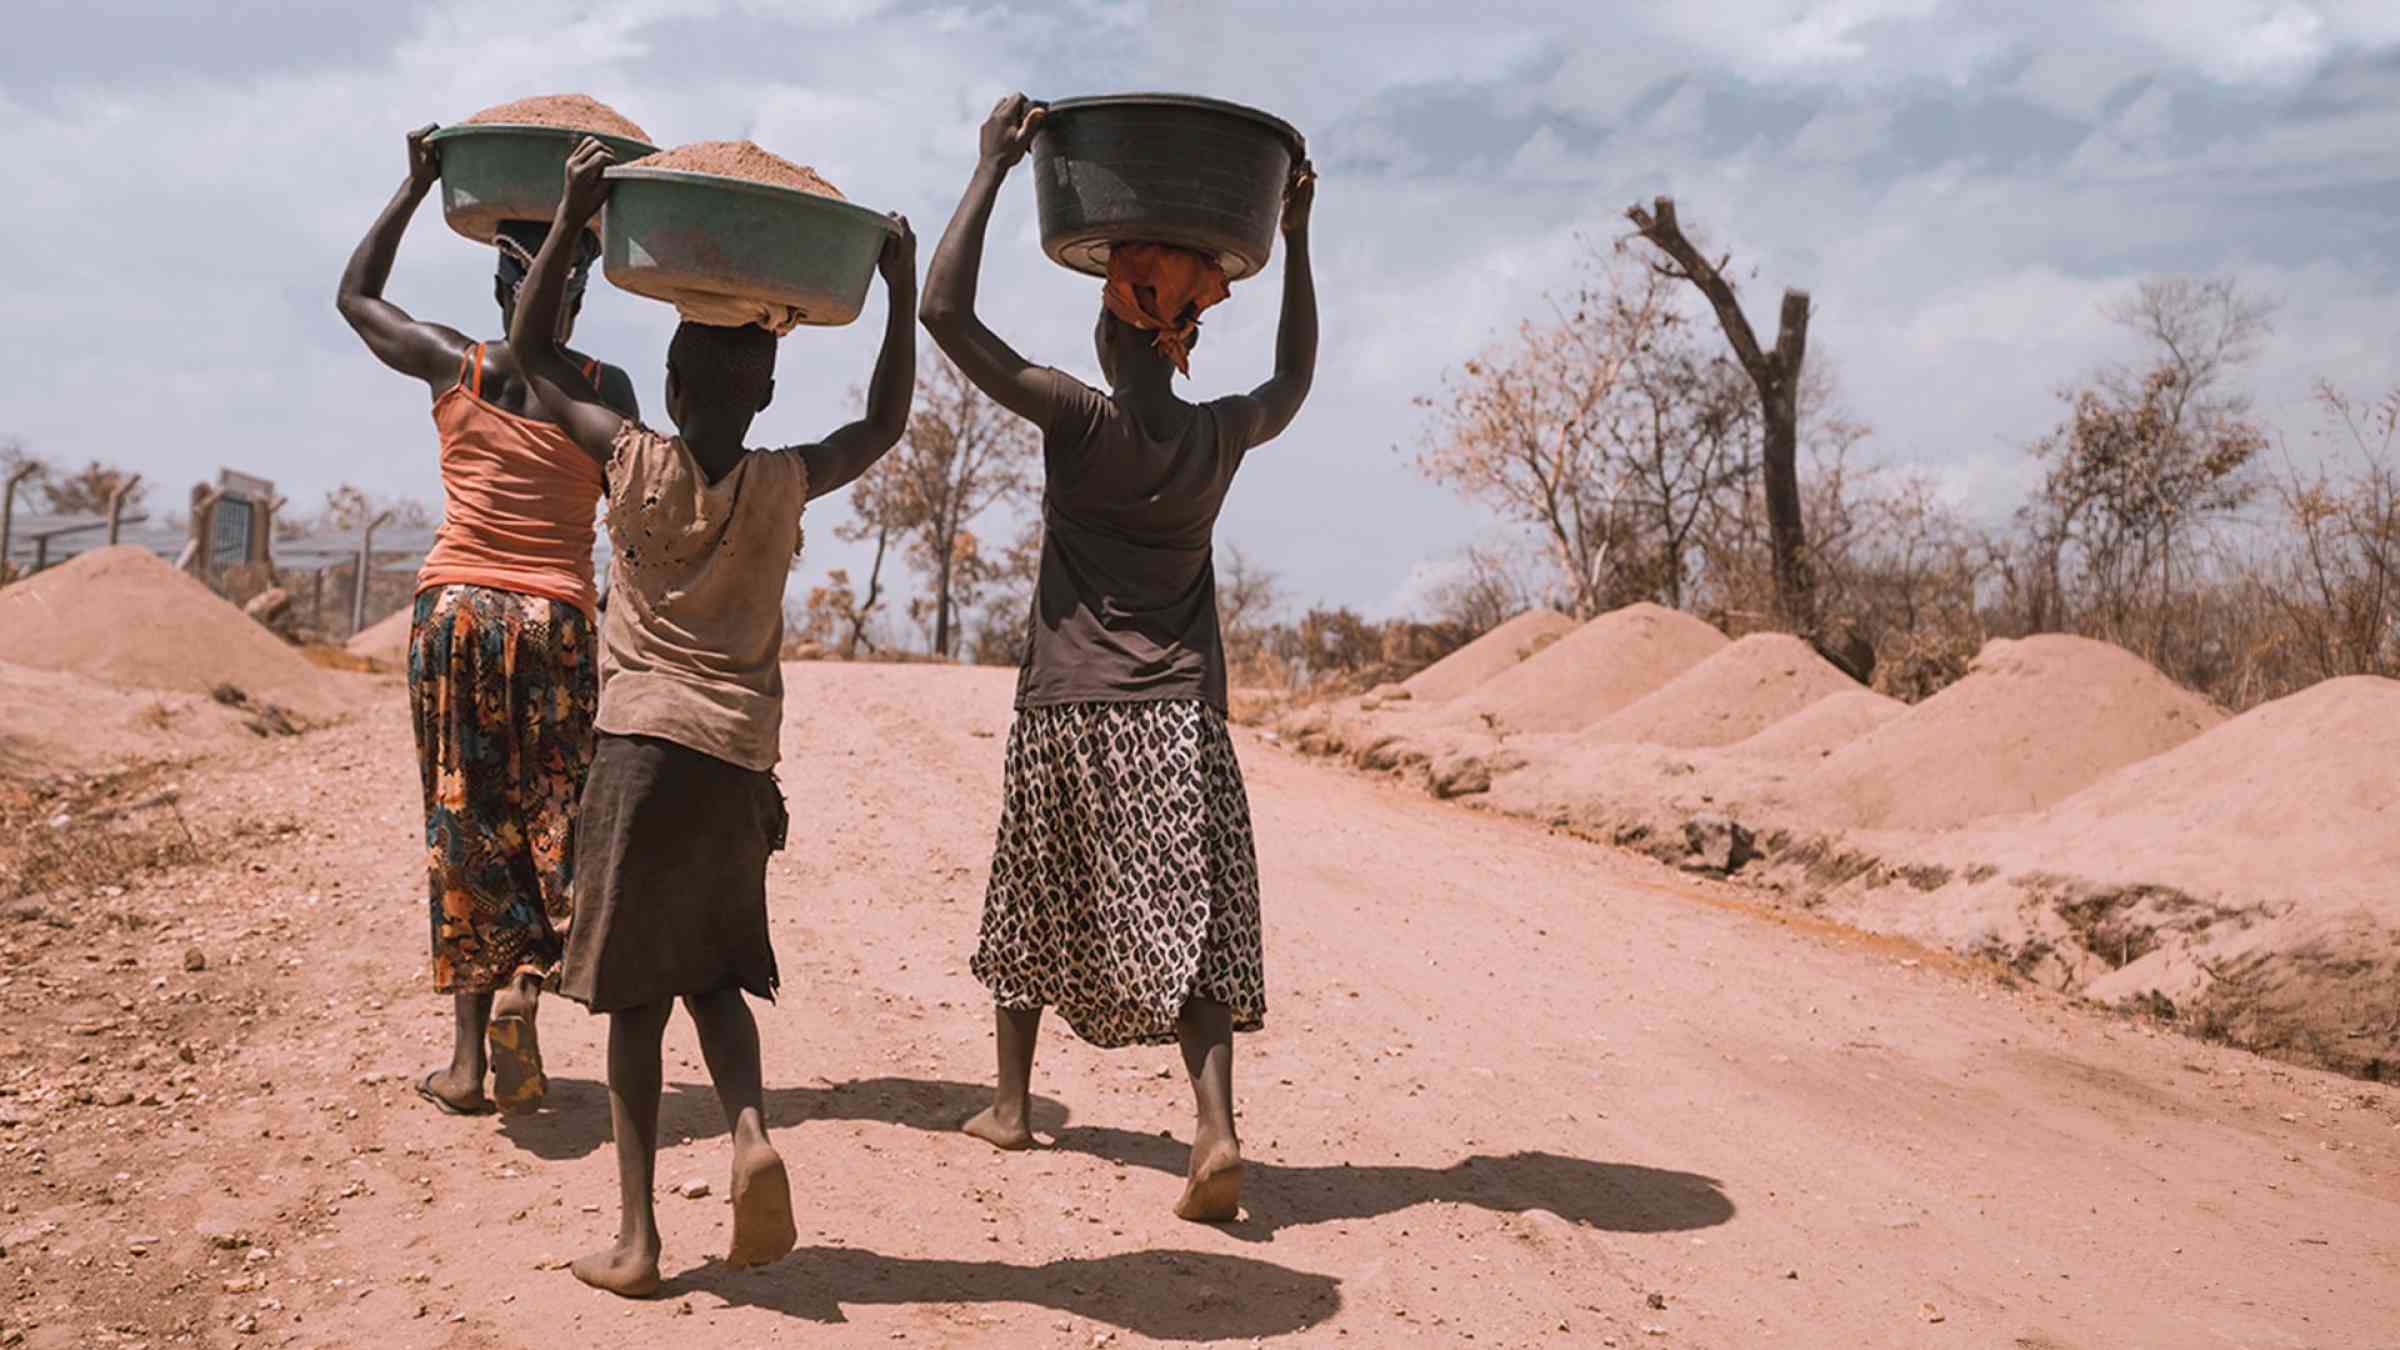 Three women carrying containers walk through a dry area in Uganda